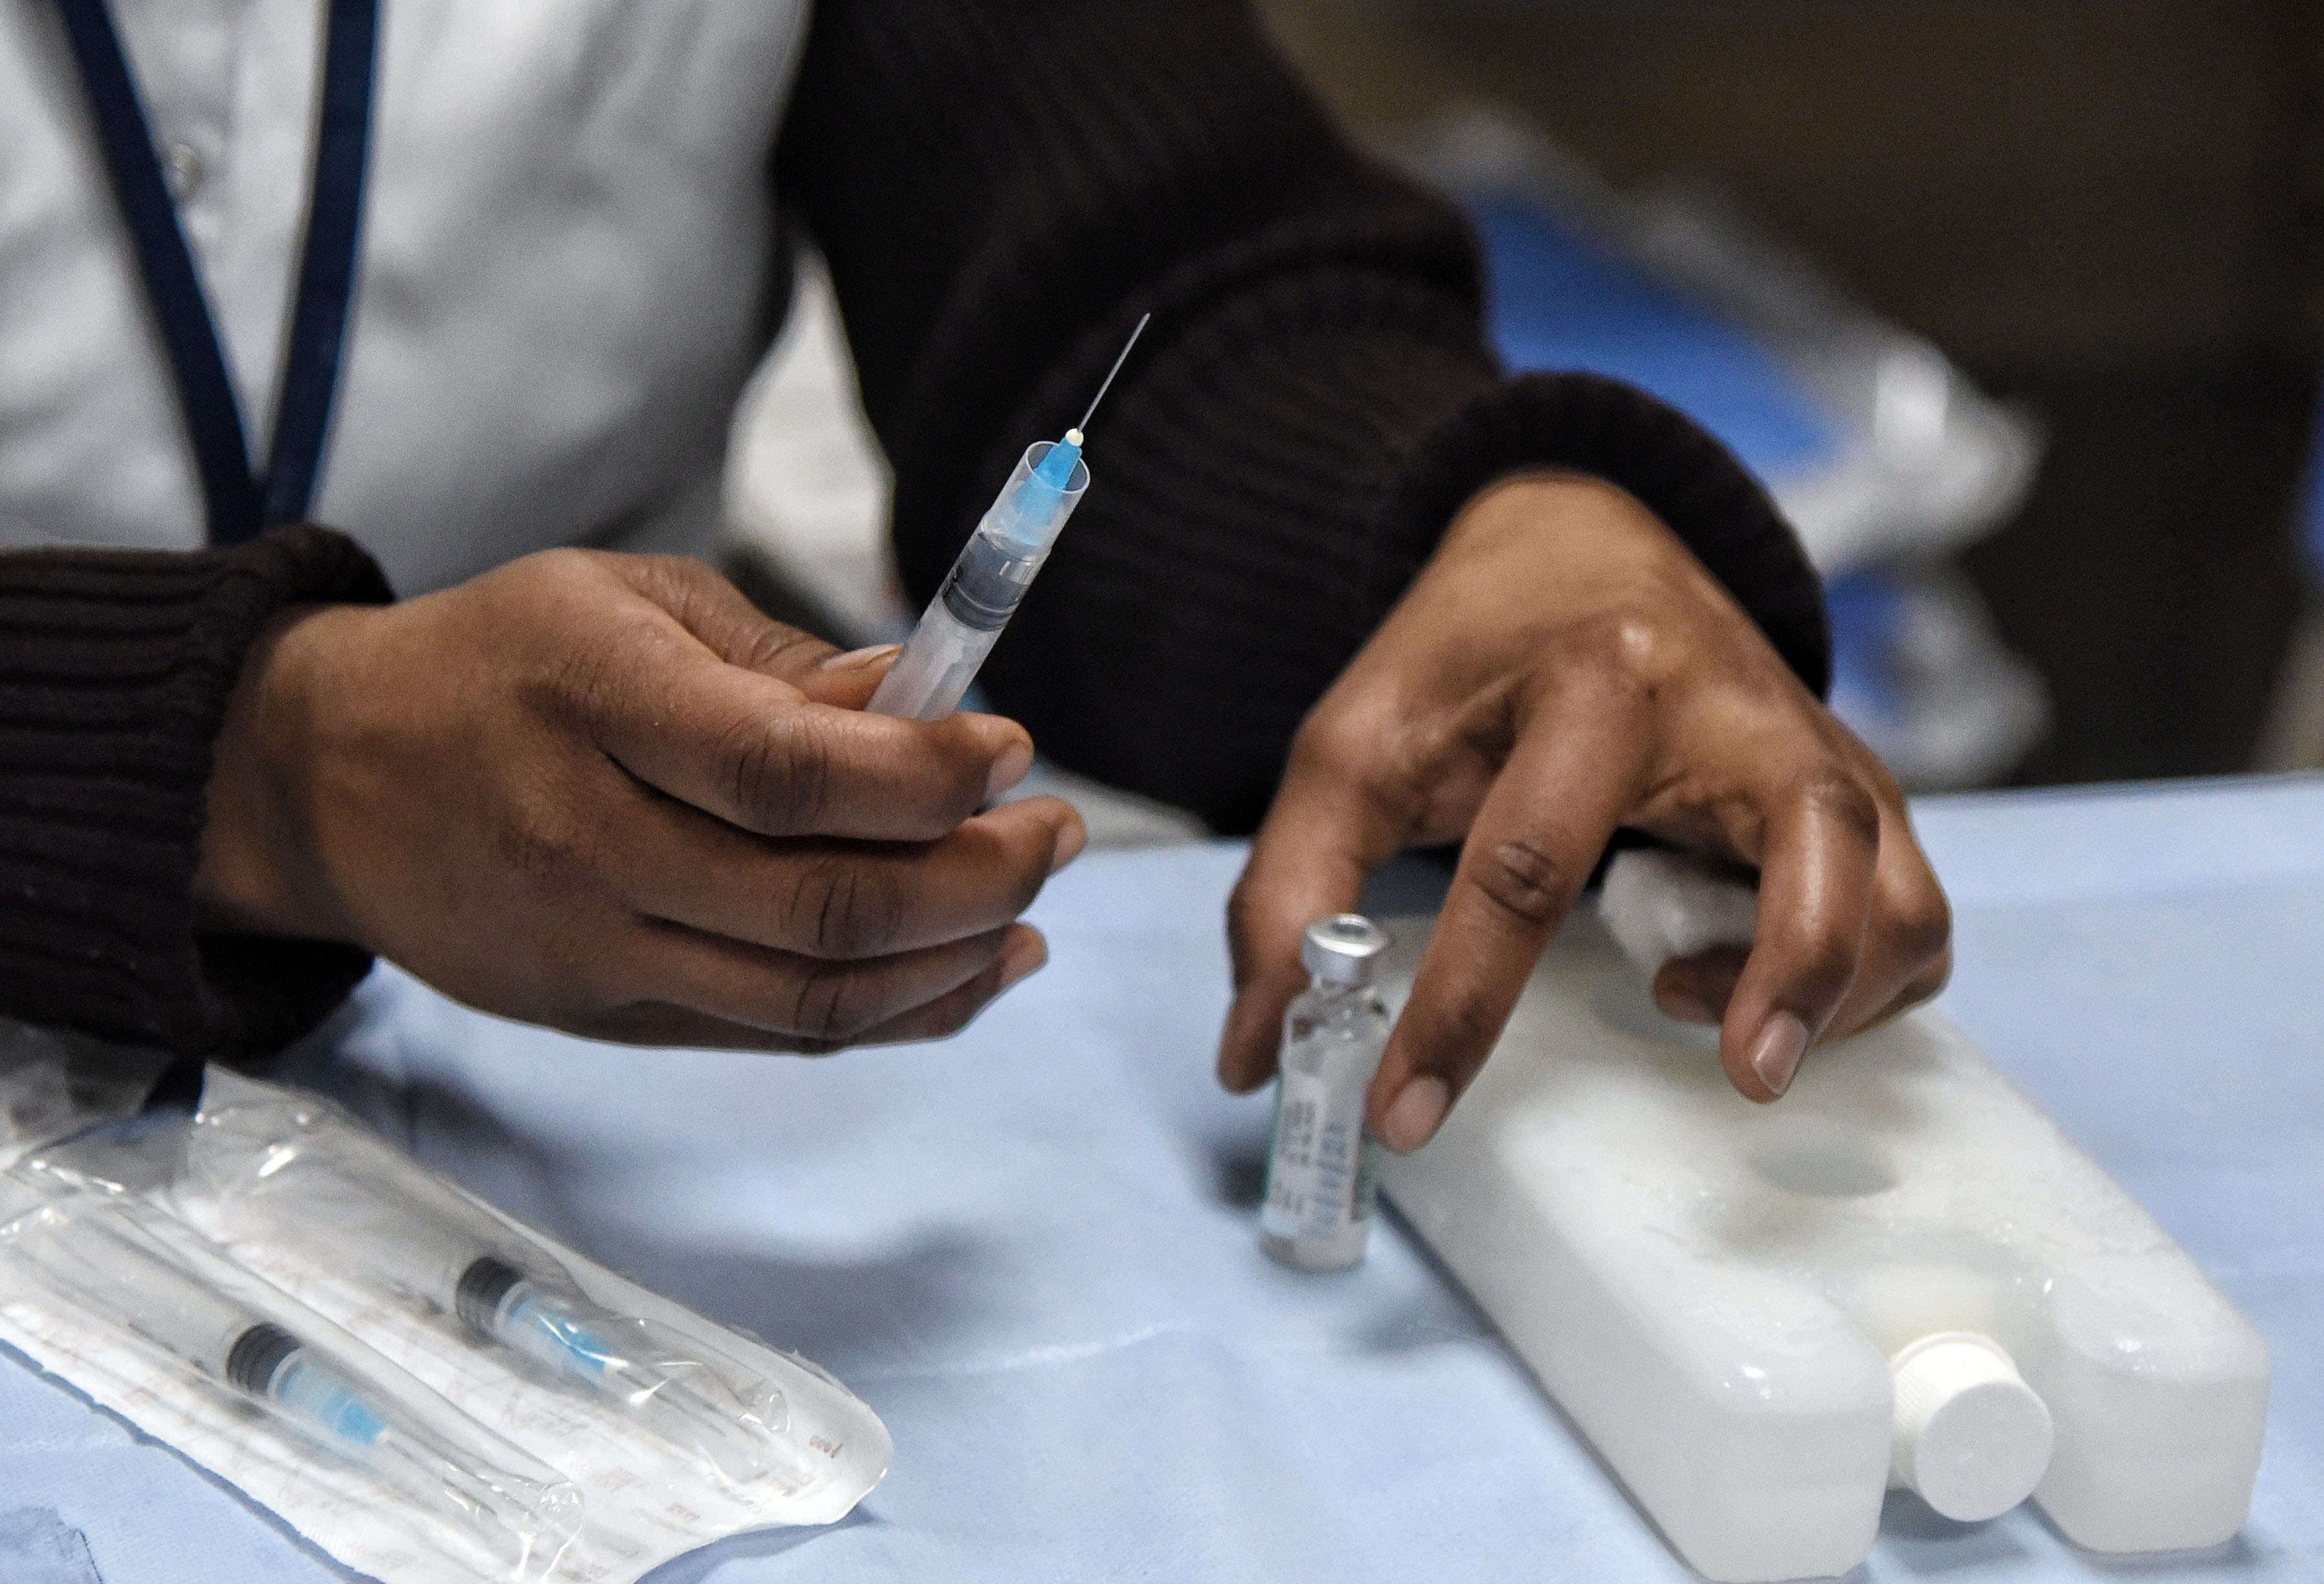 Covid vaccine price to be capped at Rs 250 per dose at private hospitals